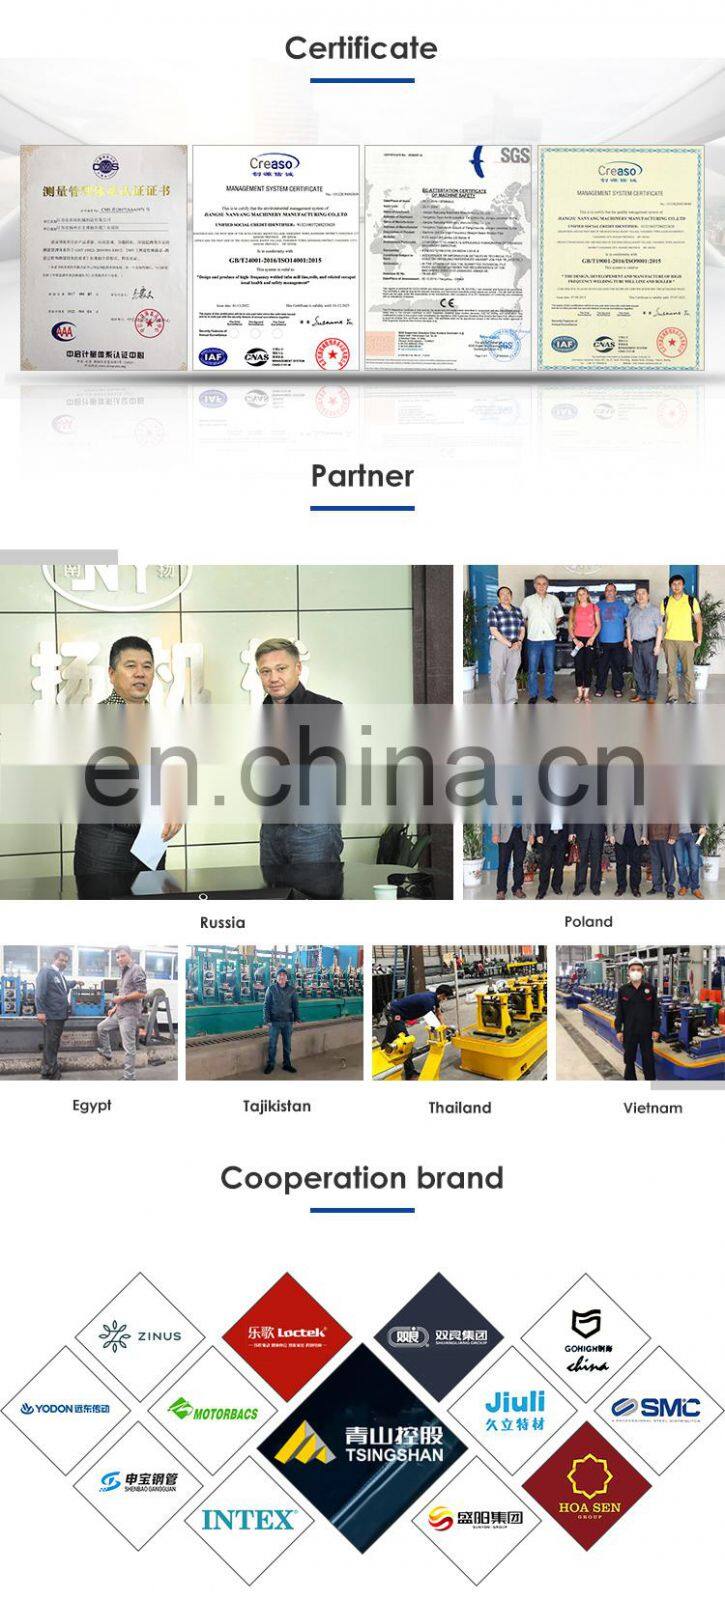 High-quality materials steel pipe making machine erw API pipe mill line